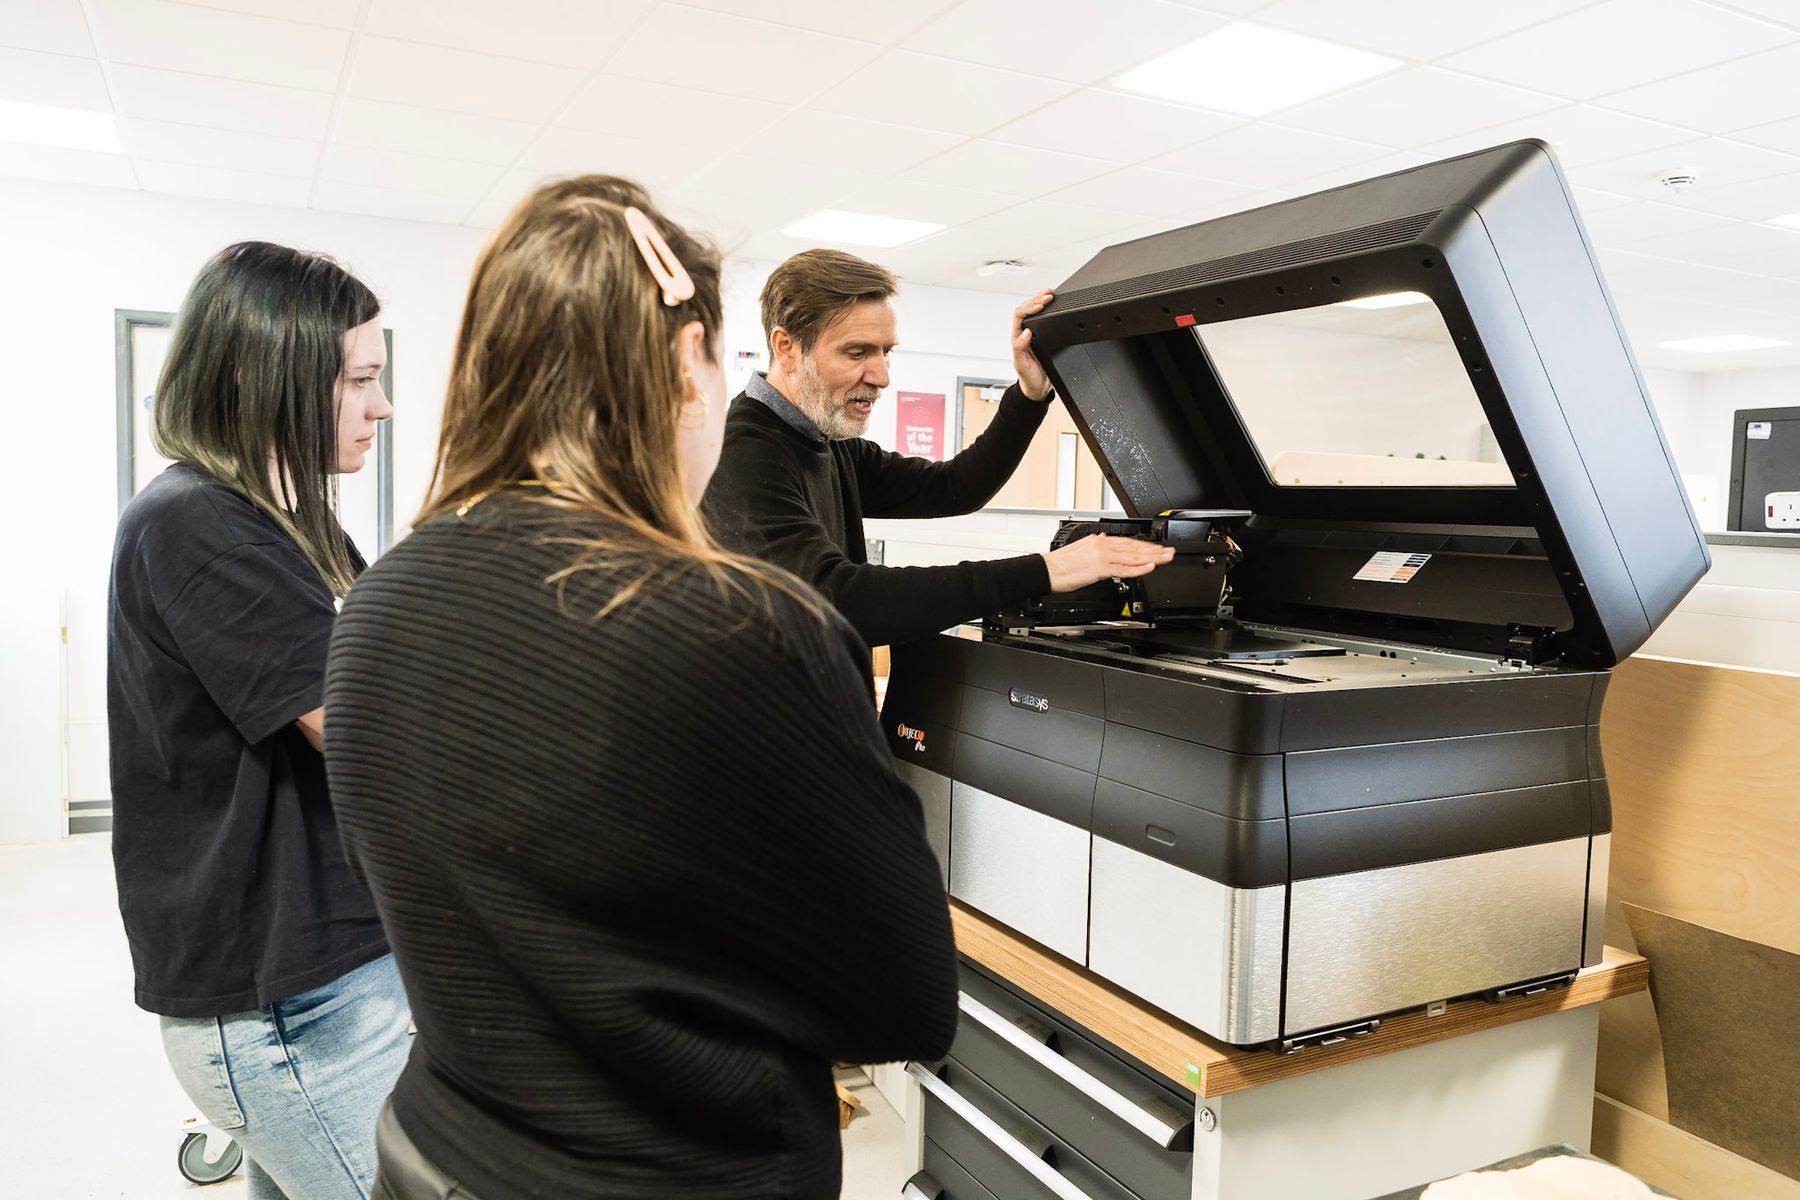 A tutor is showing two students a large digital printing machine